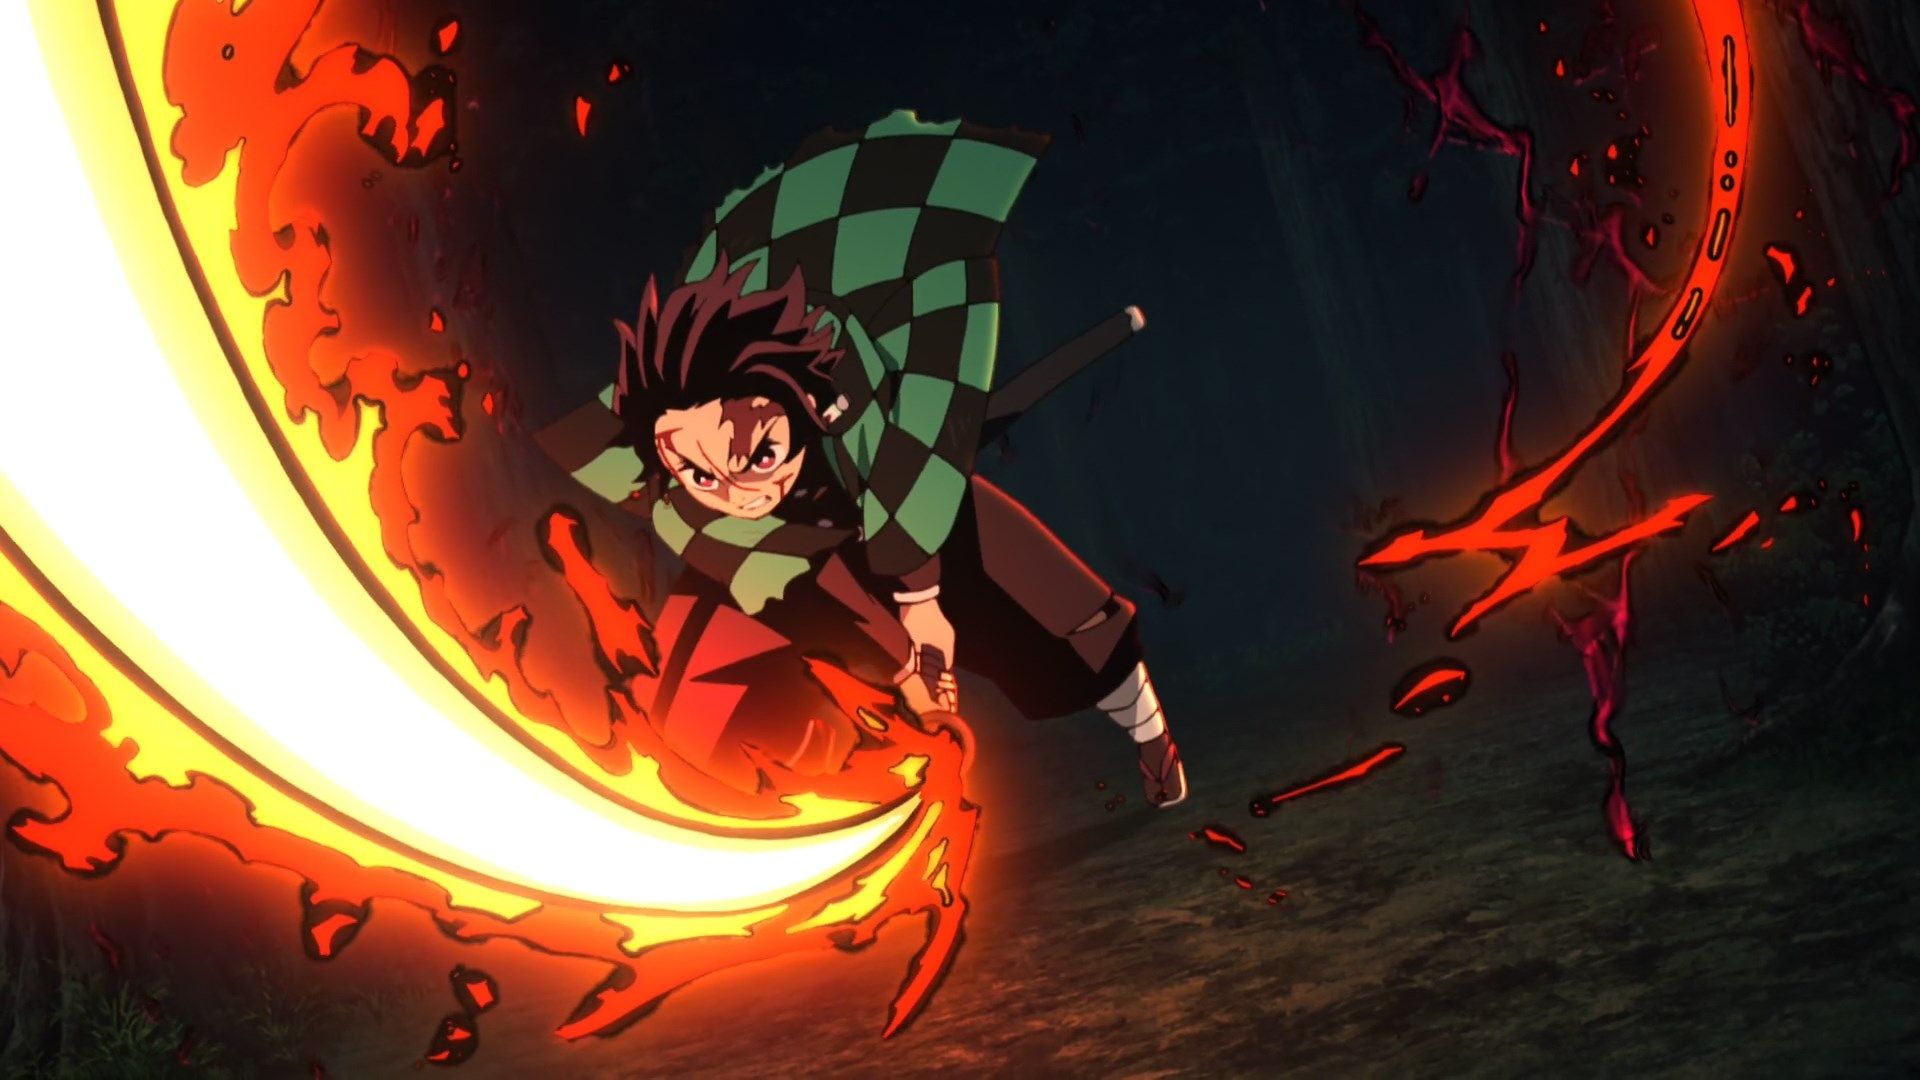 Demon Slayer Hd Wallpapers posted by John Thompson